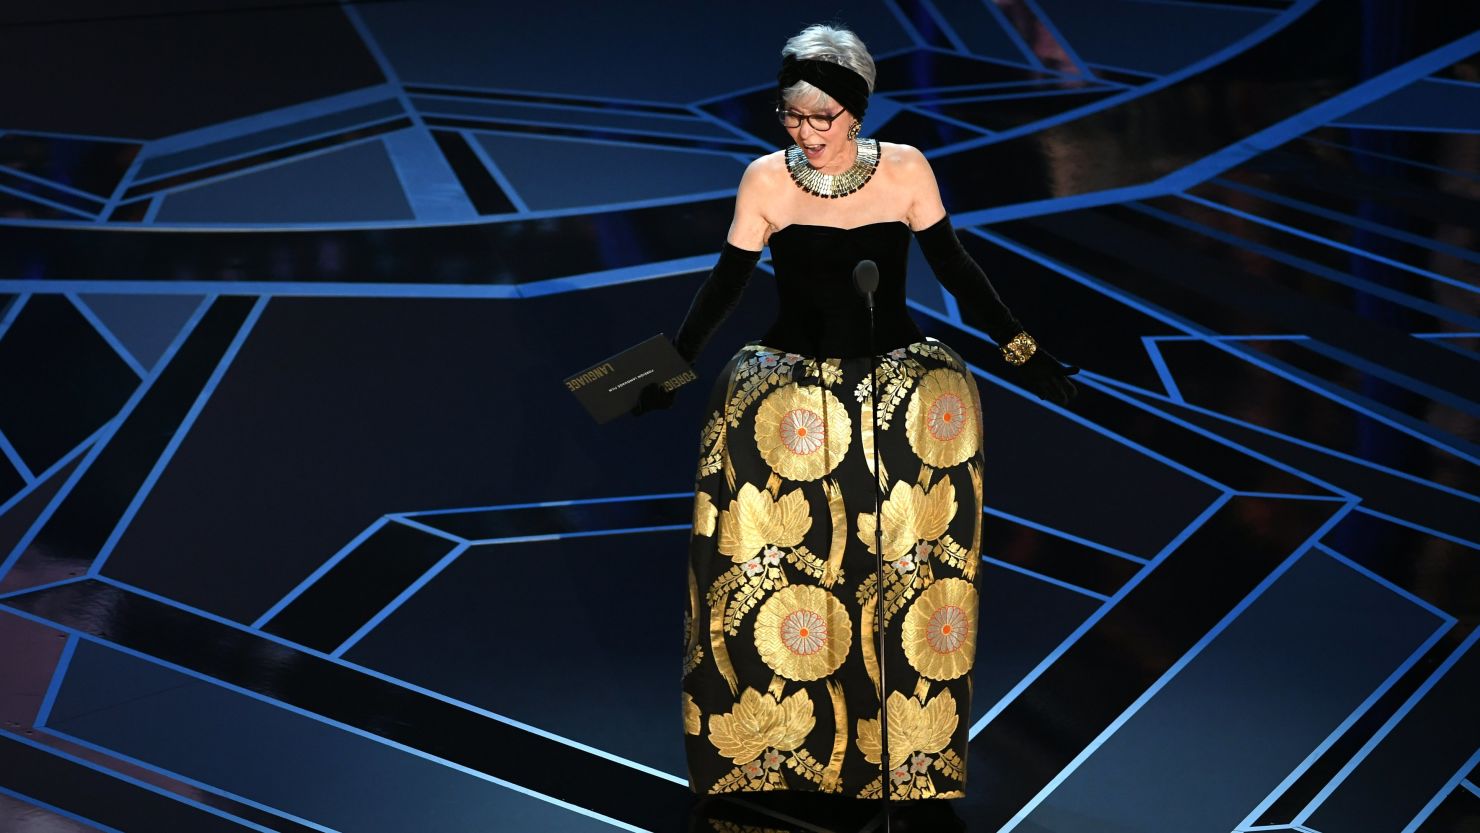 Actor Rita Moreno speaks onstage during the 90th Annual Academy Awards at the Dolby Theatre at Hollywood & Highland Center on March 4, 2018 in Hollywood, California.  